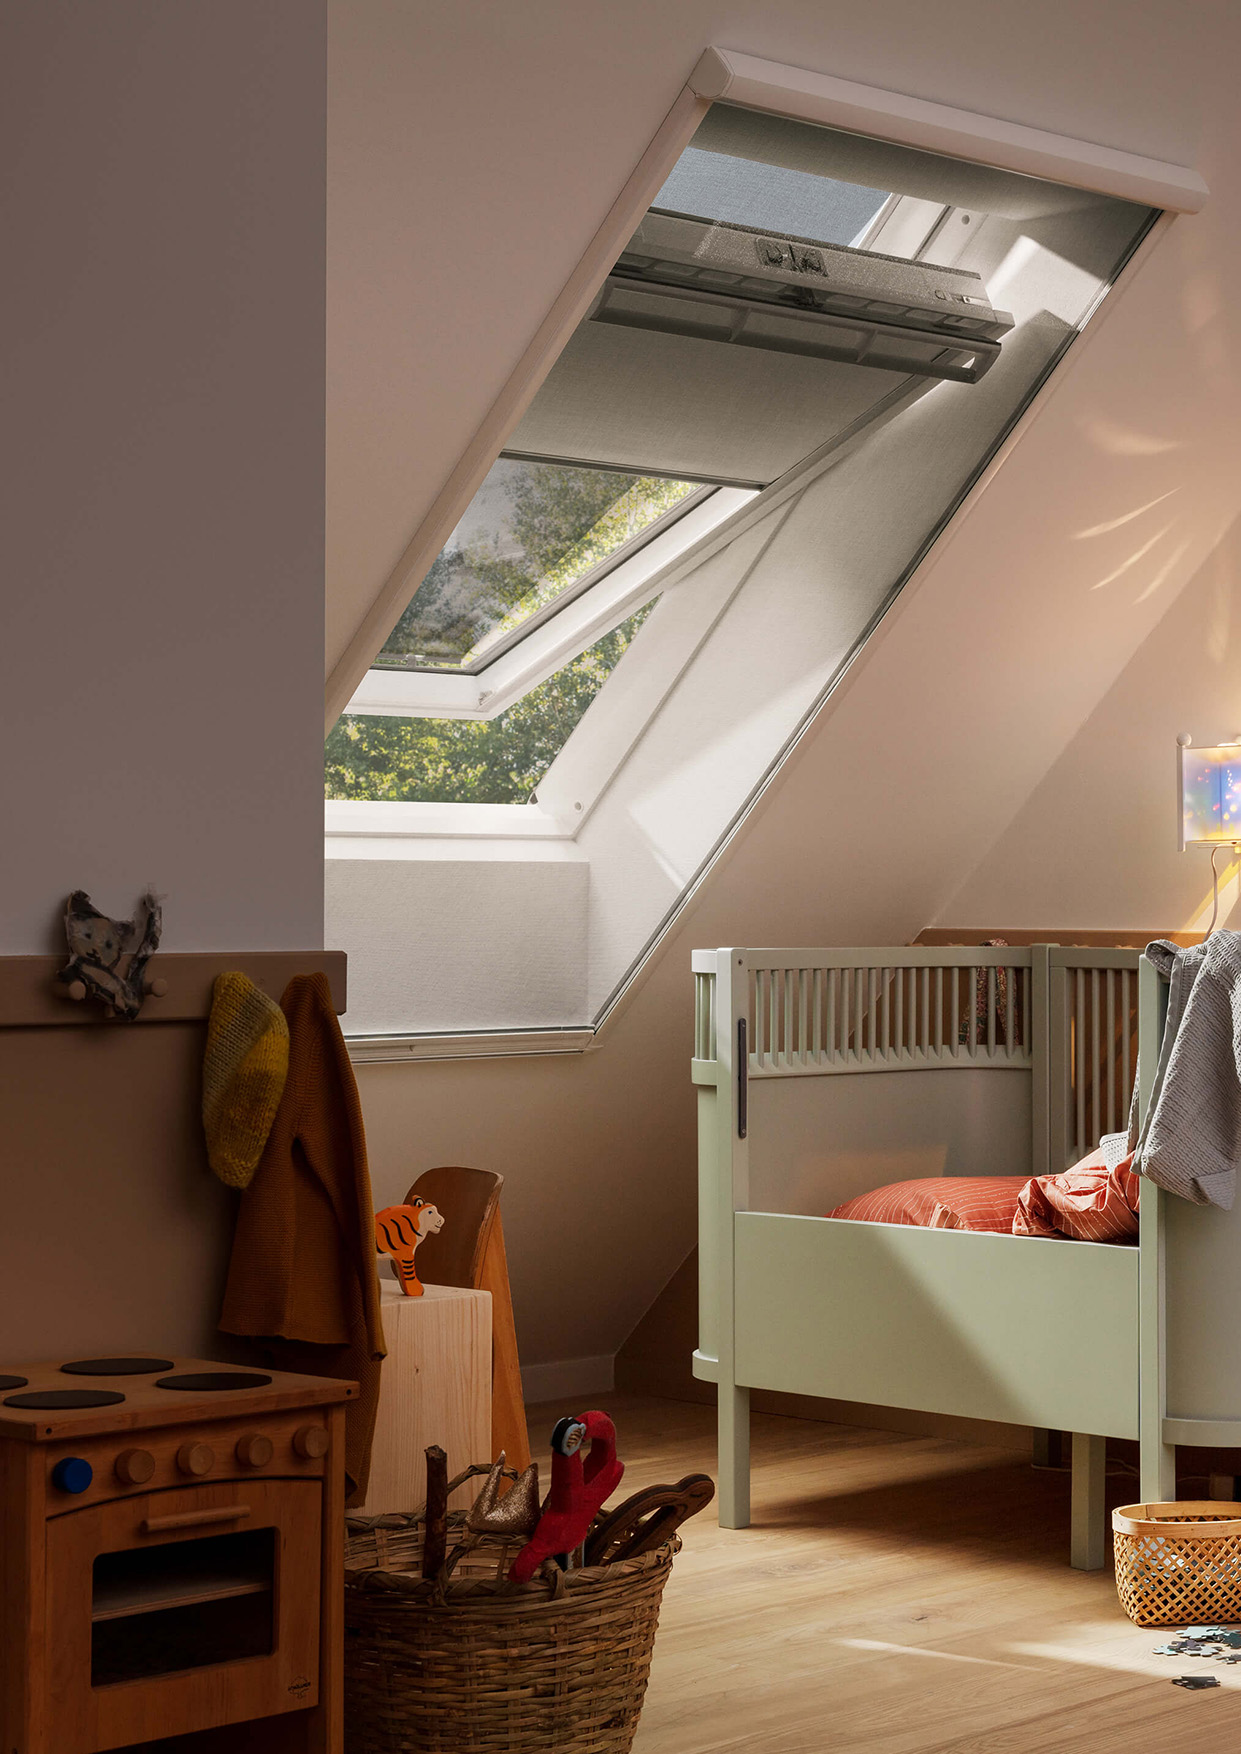 Kids room with open roof window and blinds